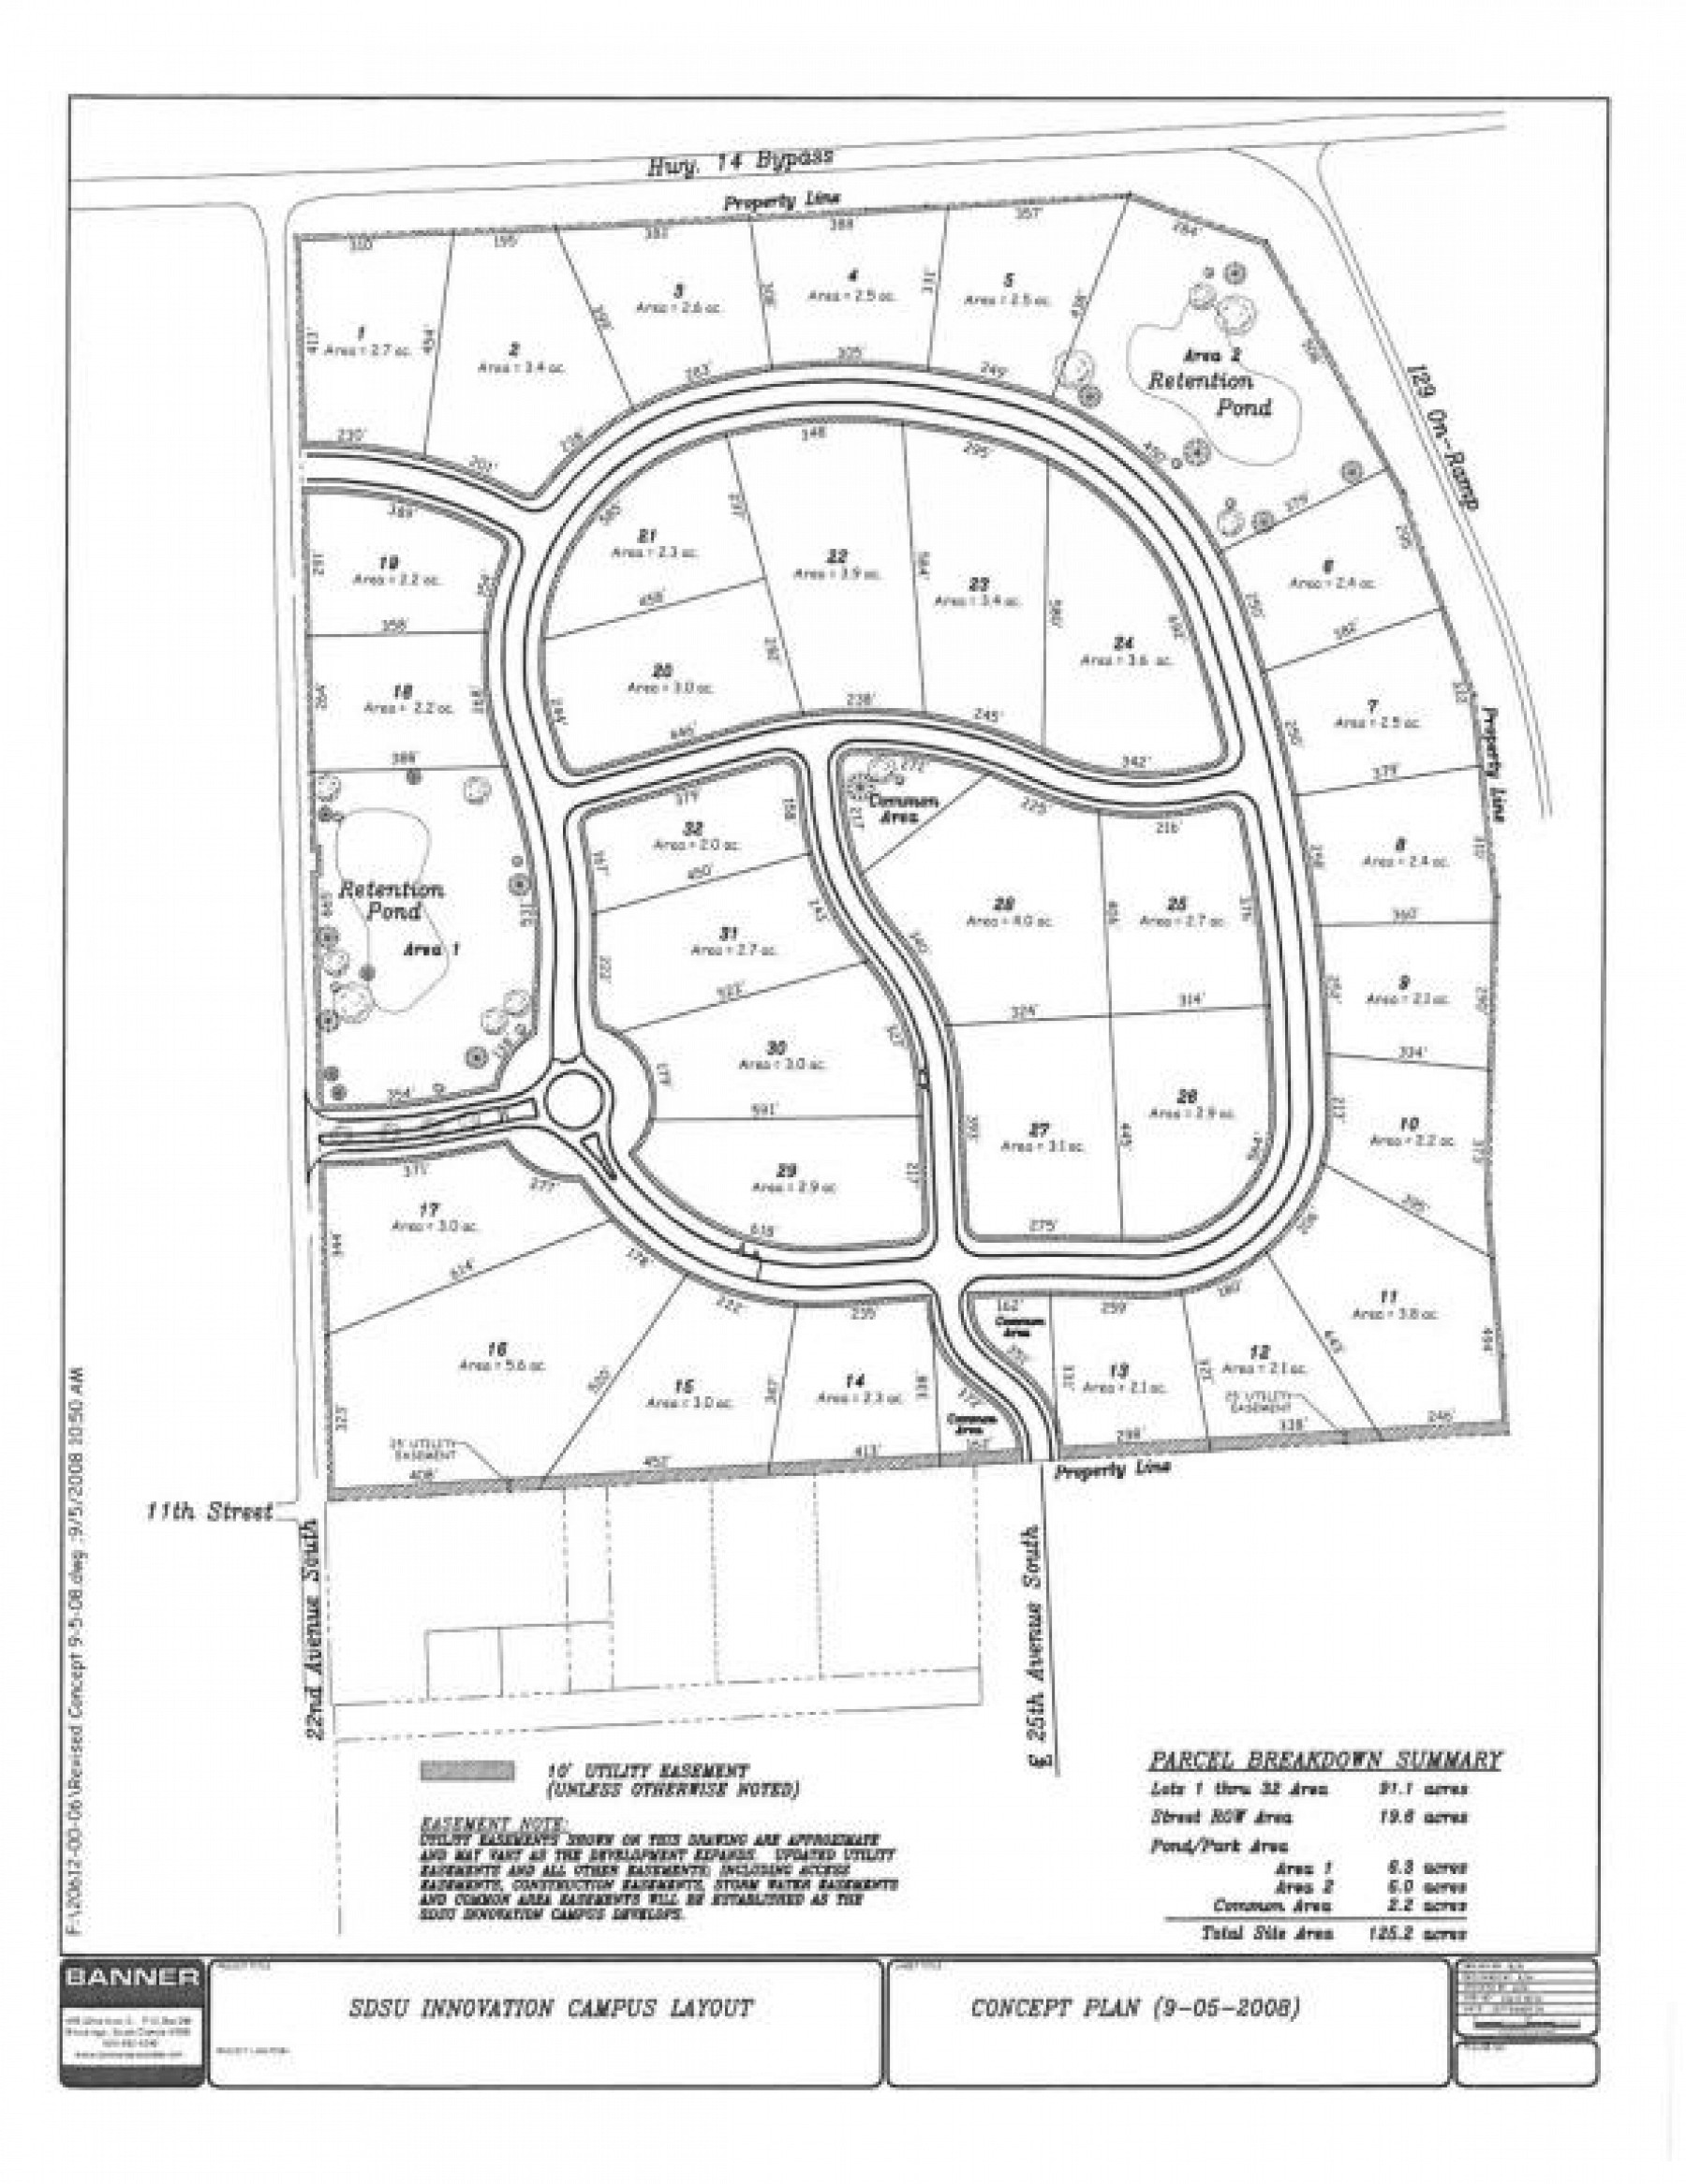 Lot 14 Innovation Campus, Brookings, SD 57006